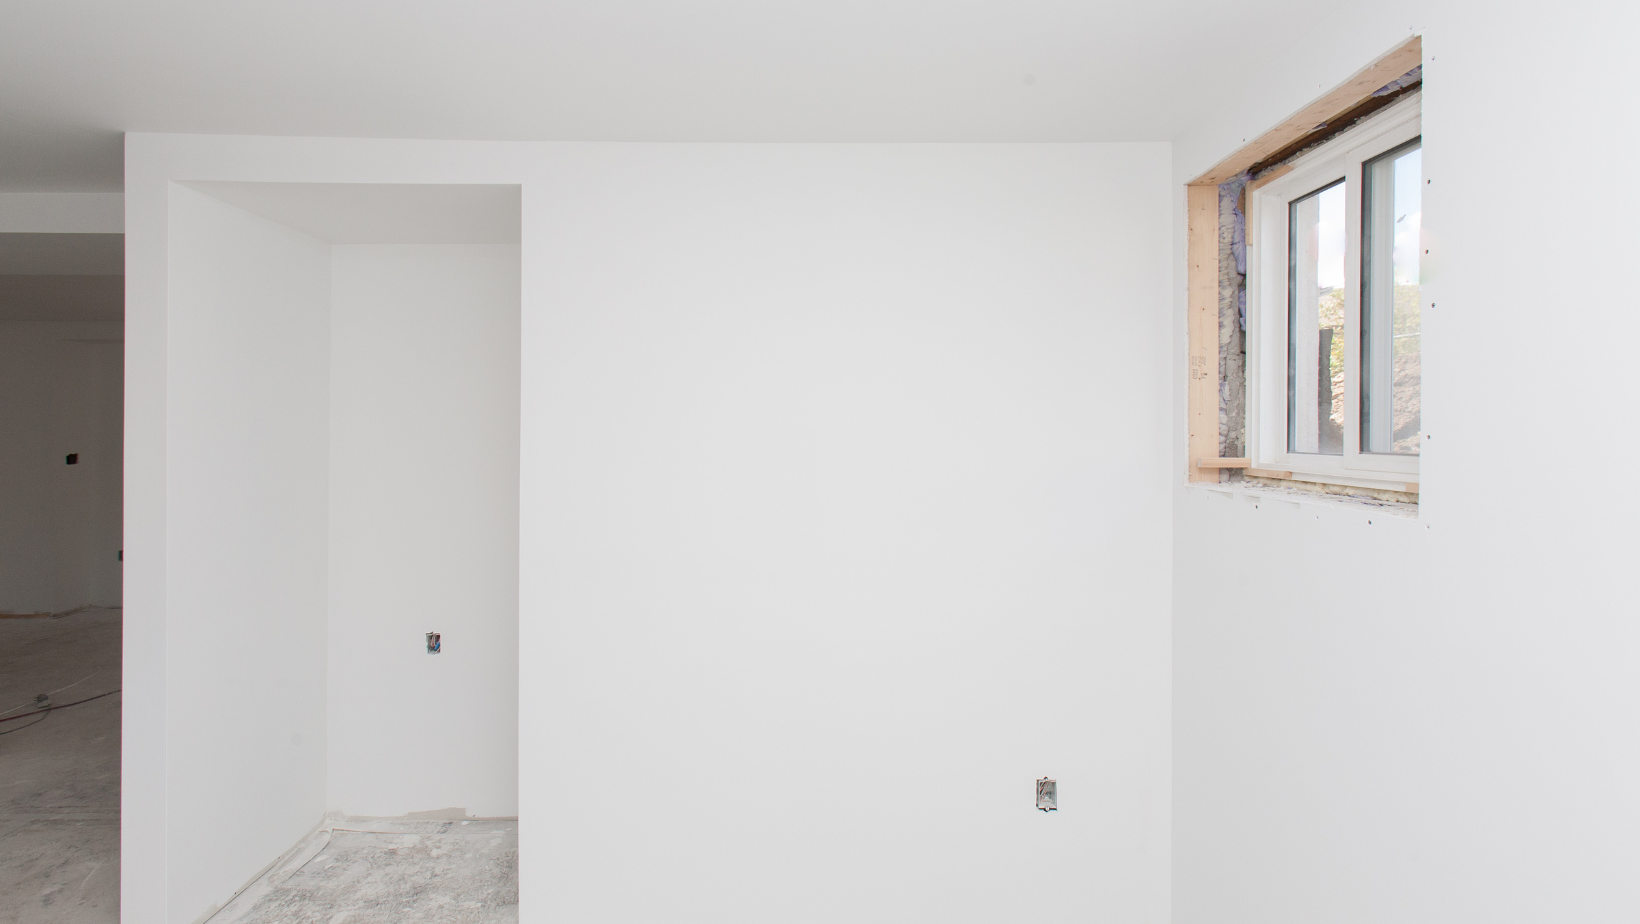 do you need to primer drywall before painting?